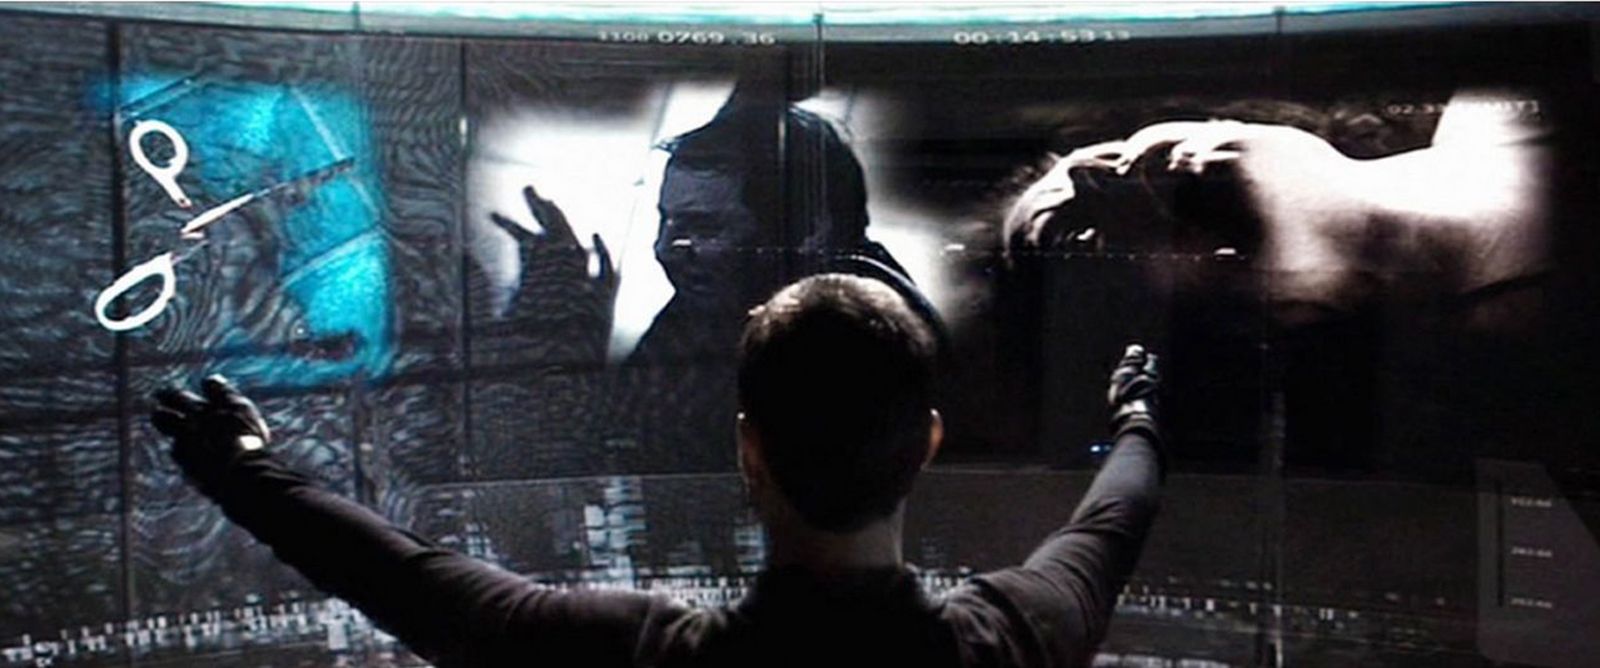 minority report style crime predictor used to stop crime before it happens image 1